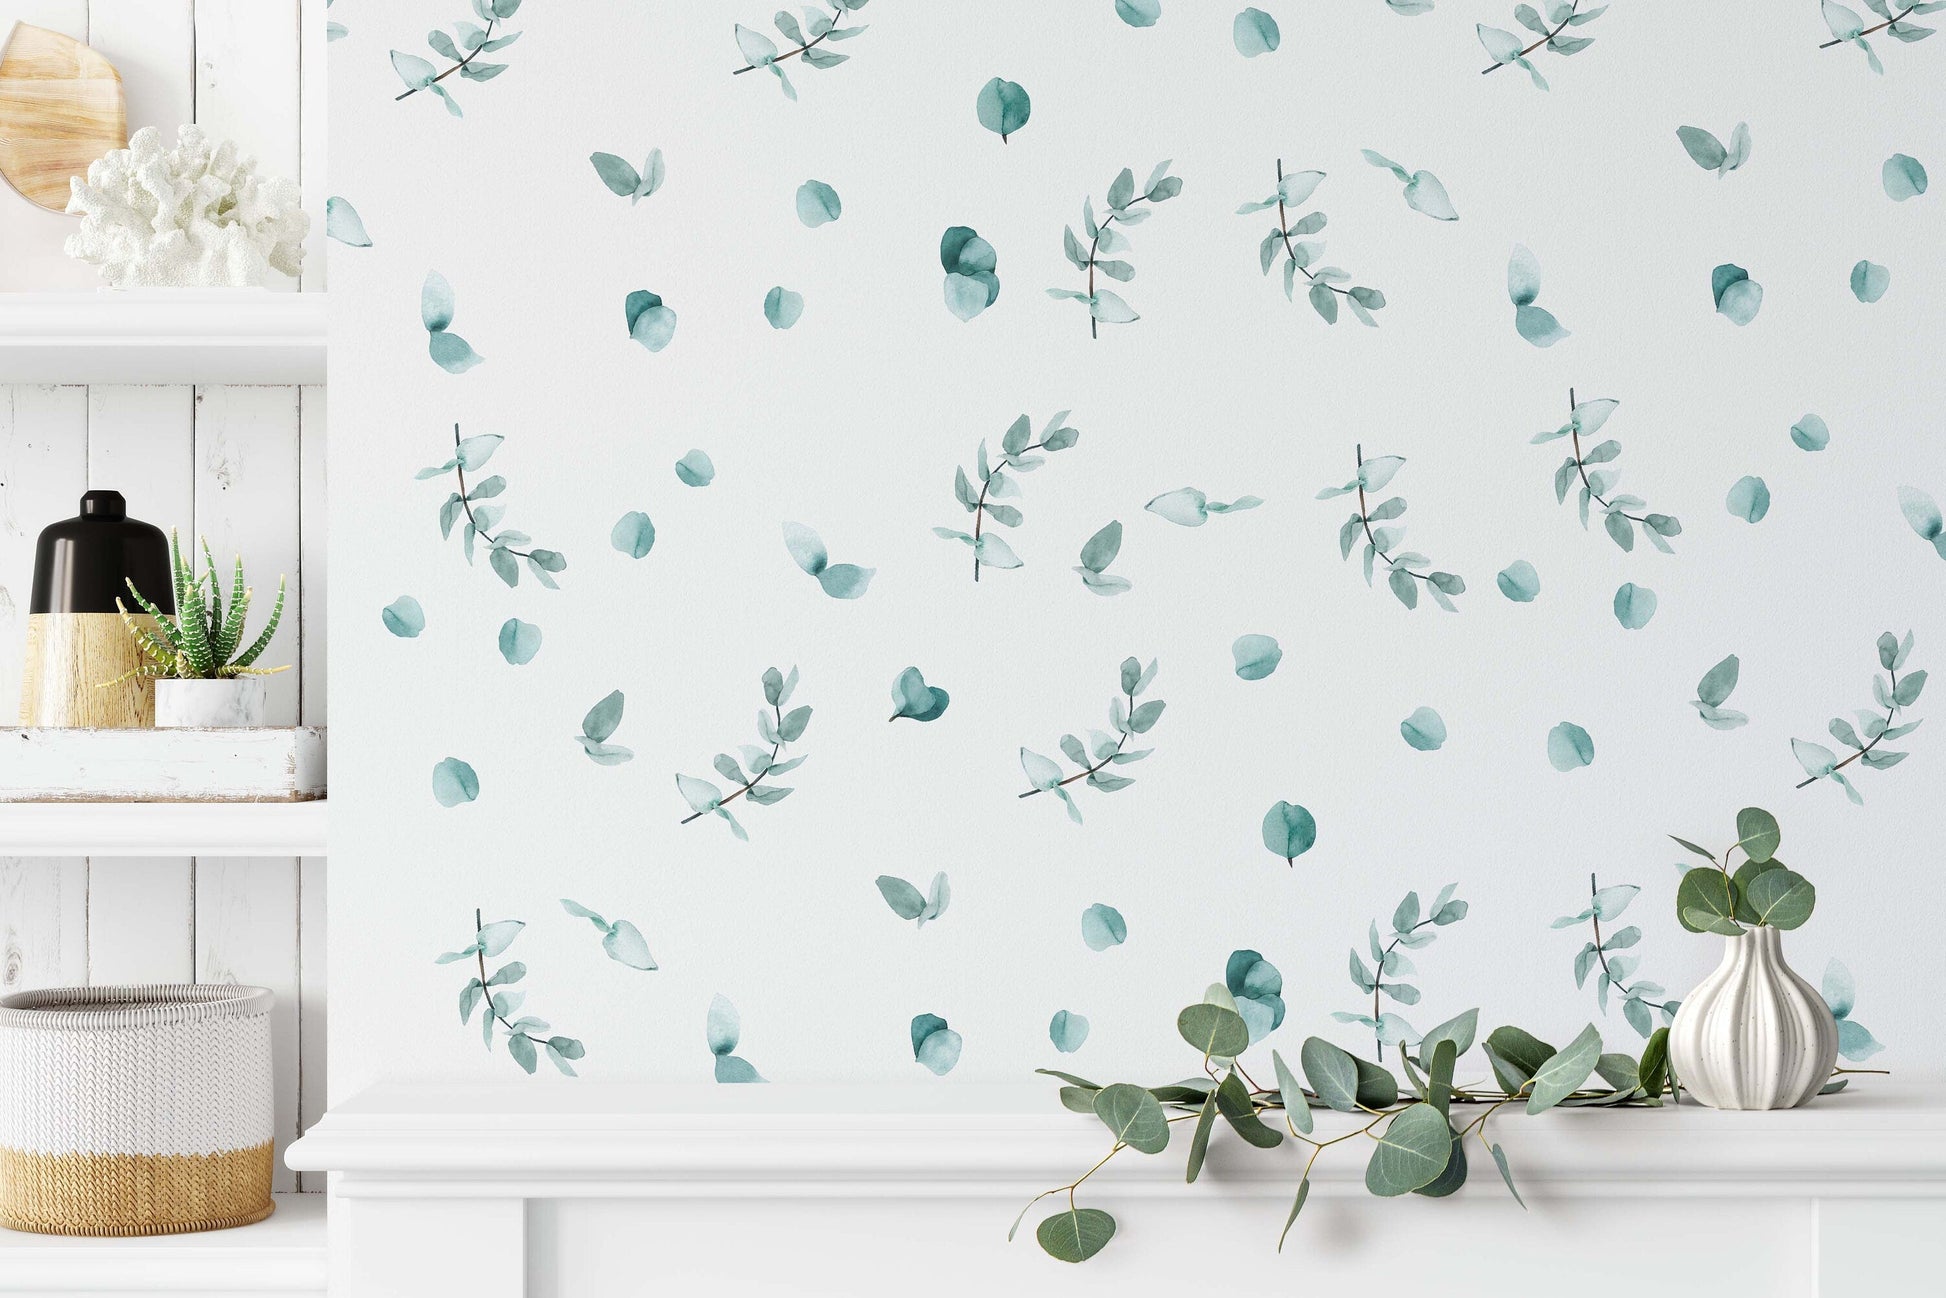 Eucalyptus Wall Decals Greenery Watercolor Sticker Leaves Room Decoration, LF099